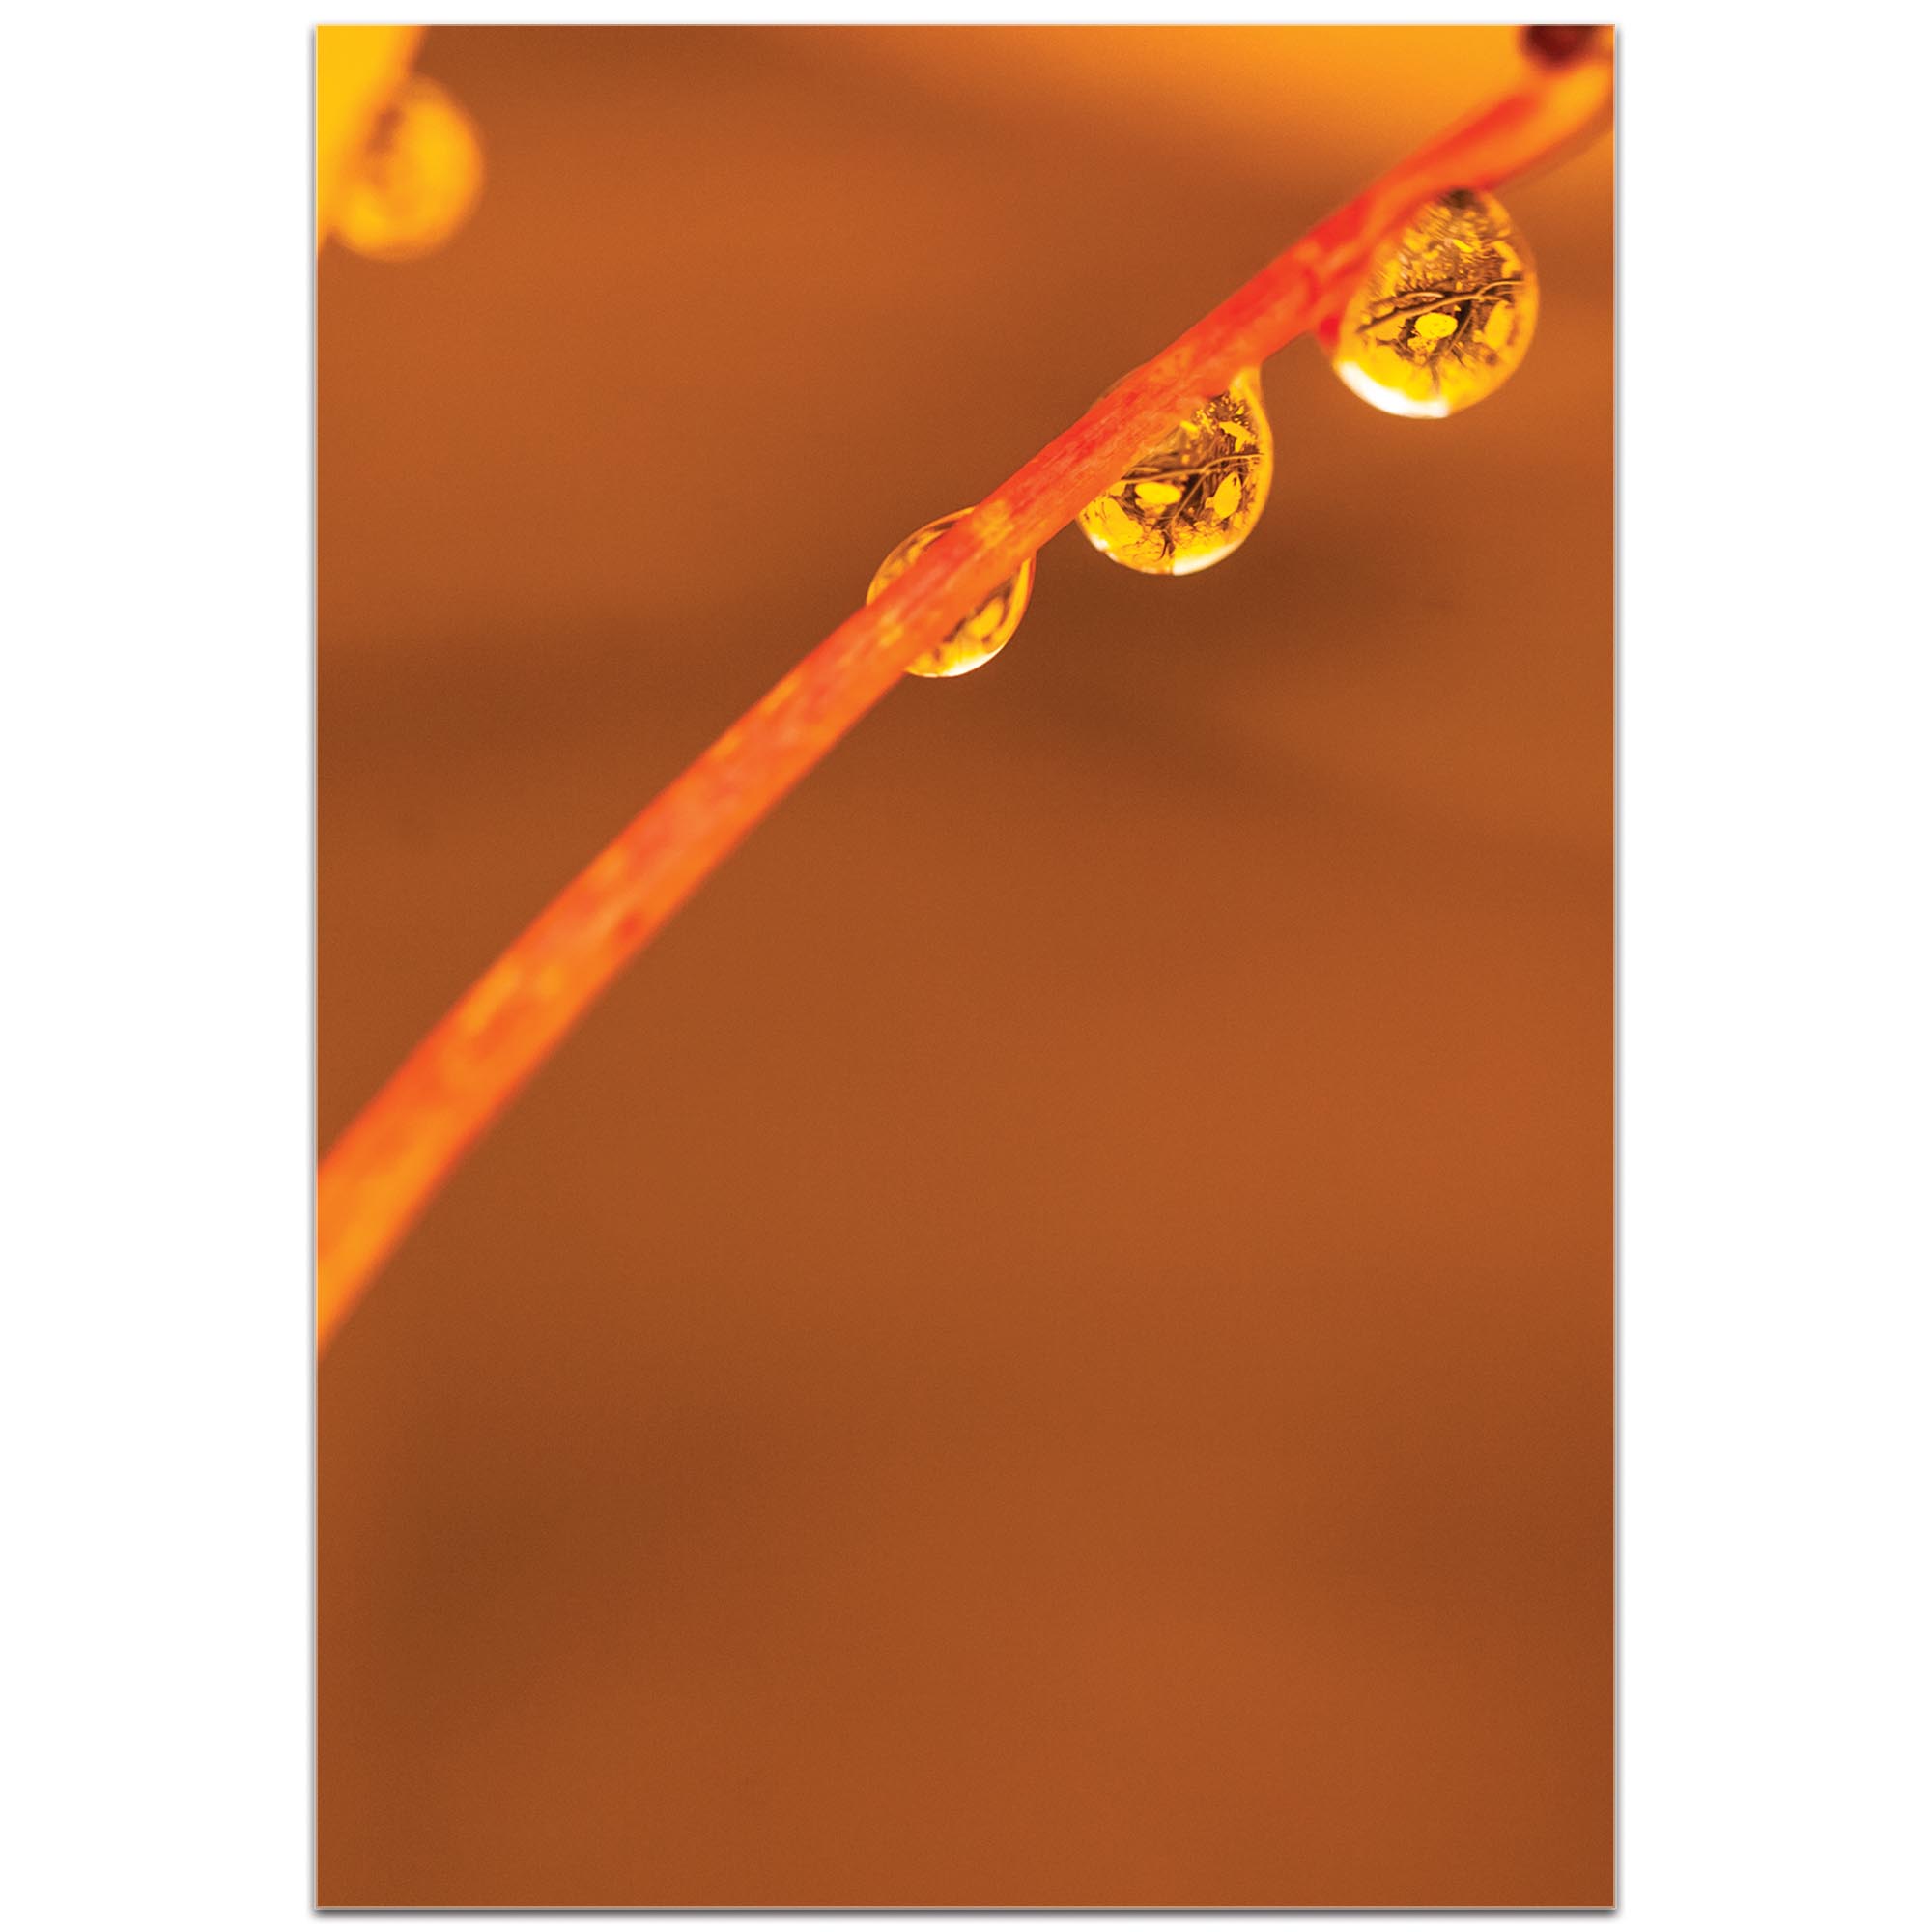 Nature Photography 'Morning Dew' - Autumn Leaves Art on Metal or Plexiglass - Image 2